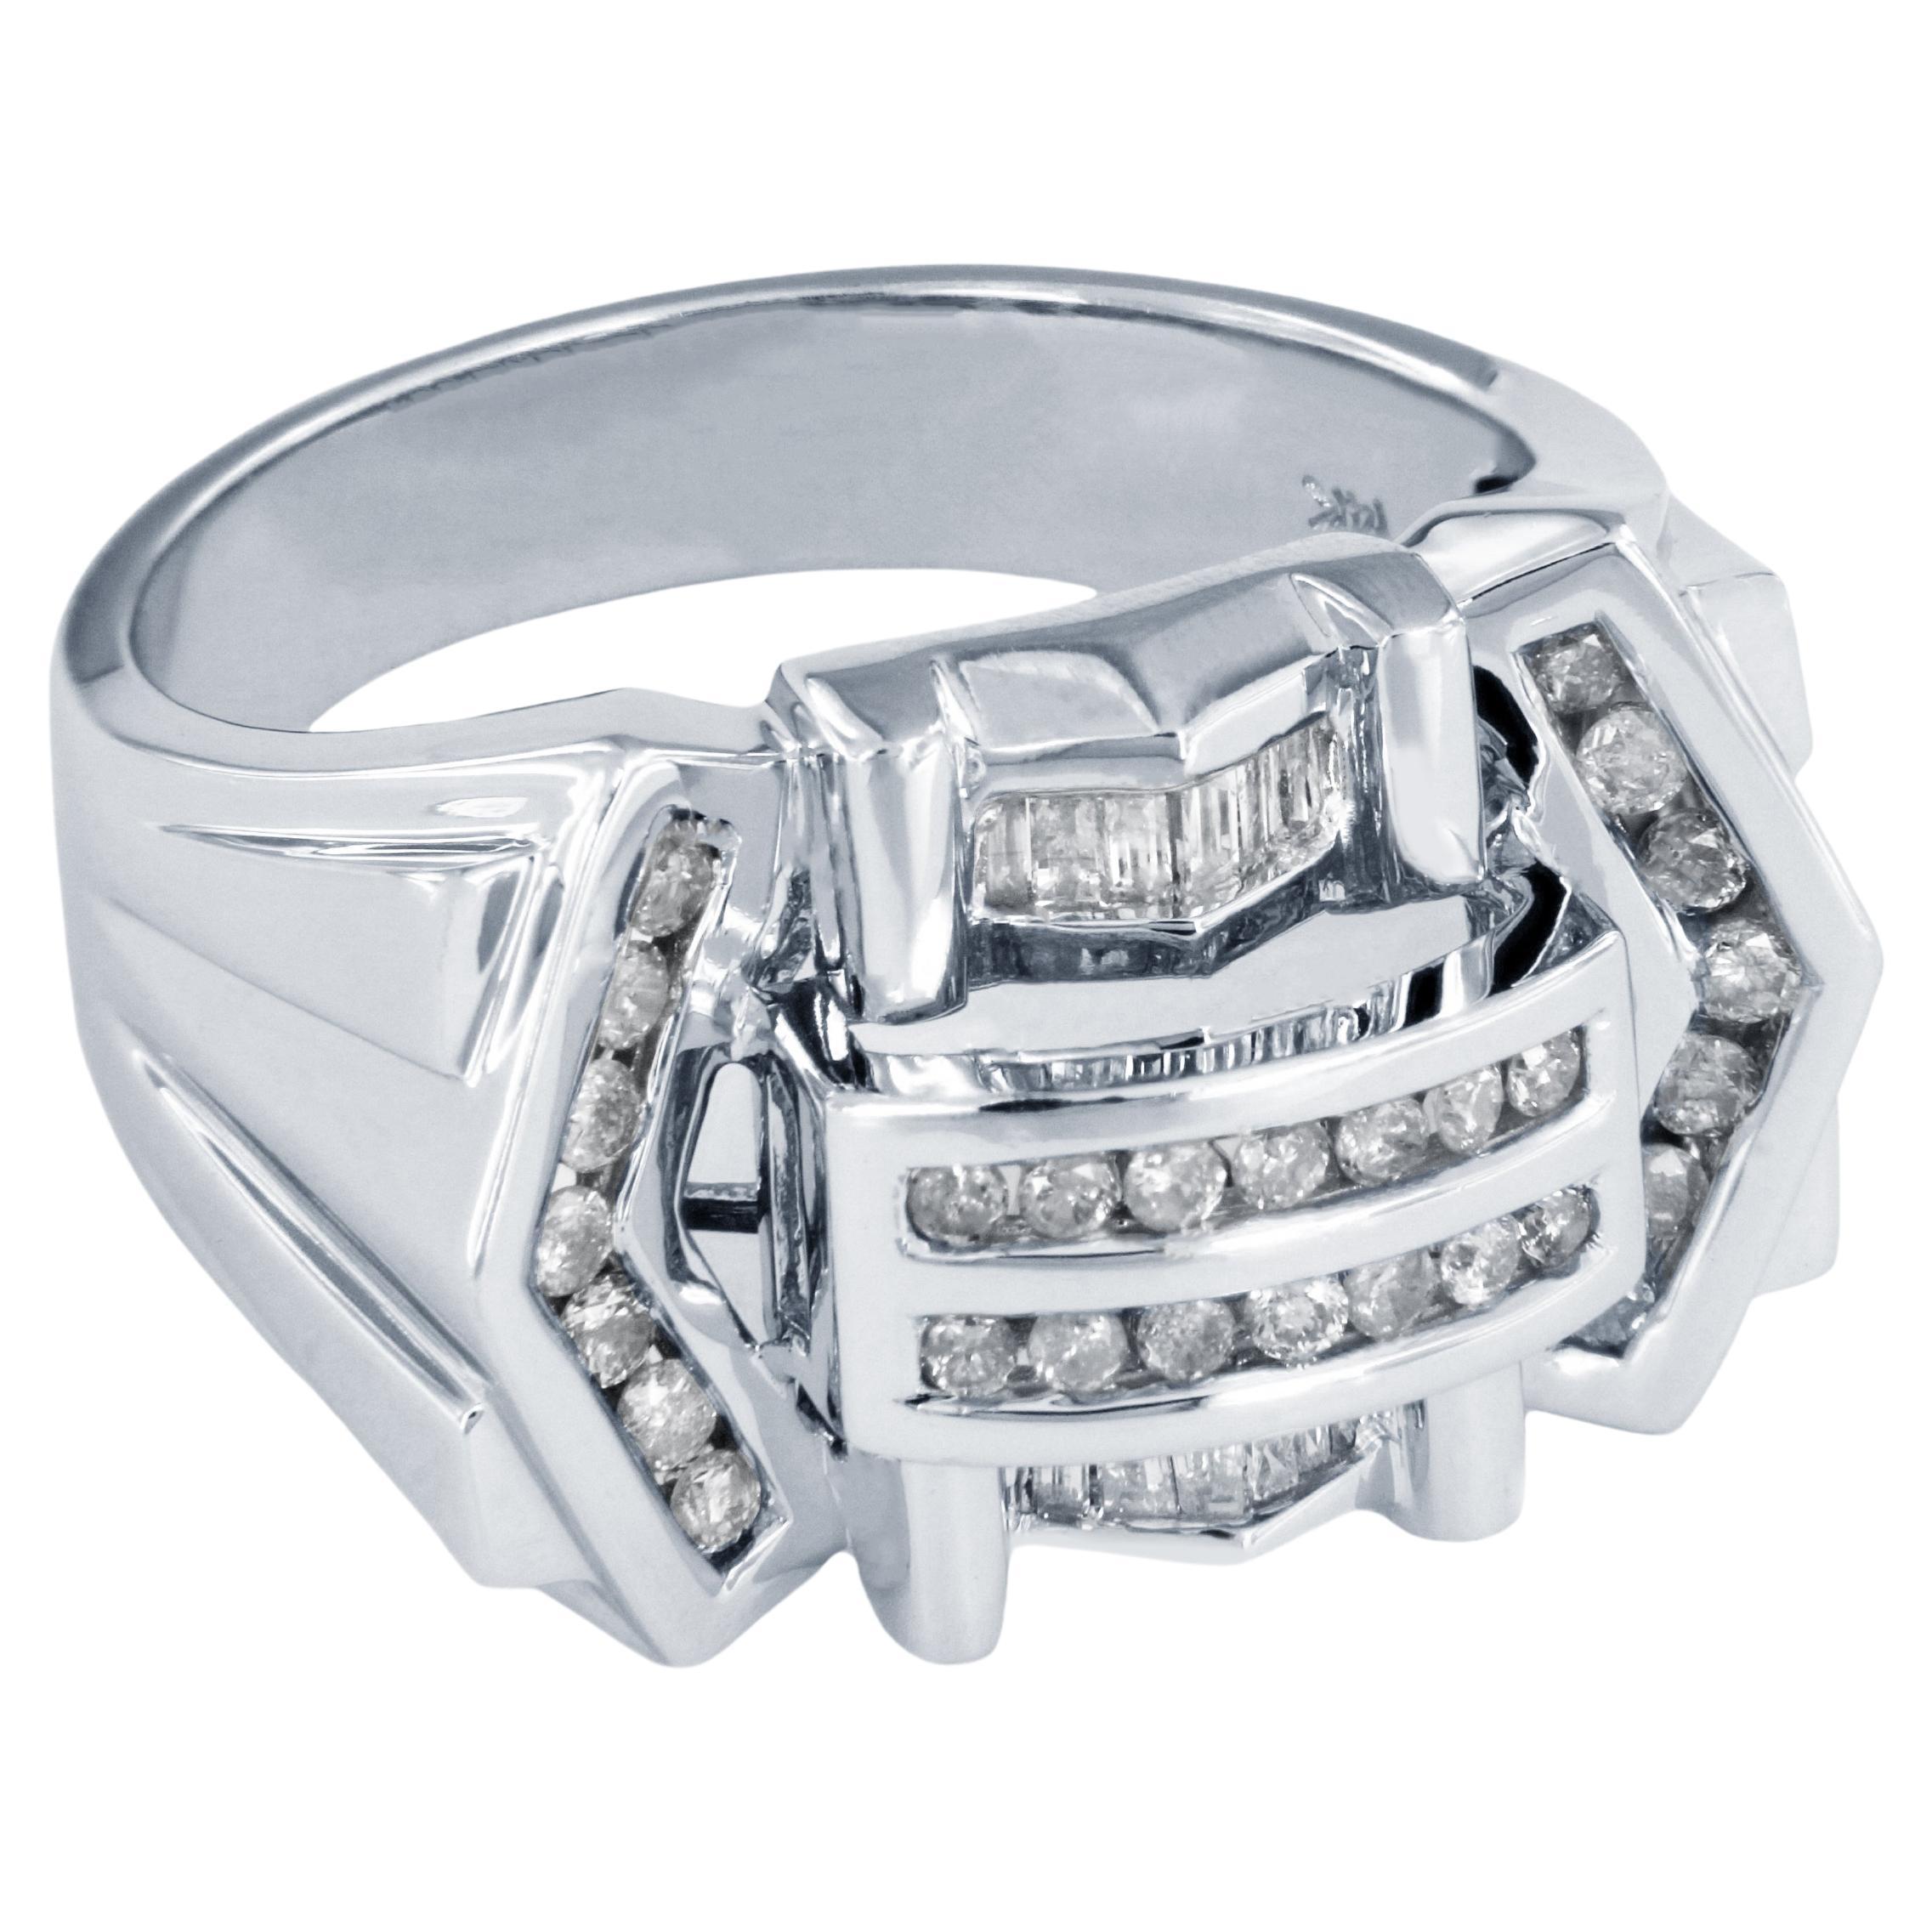 Sparkle 14k White Gold Ring with 1.5ct Diamonds, VS/G For Sale